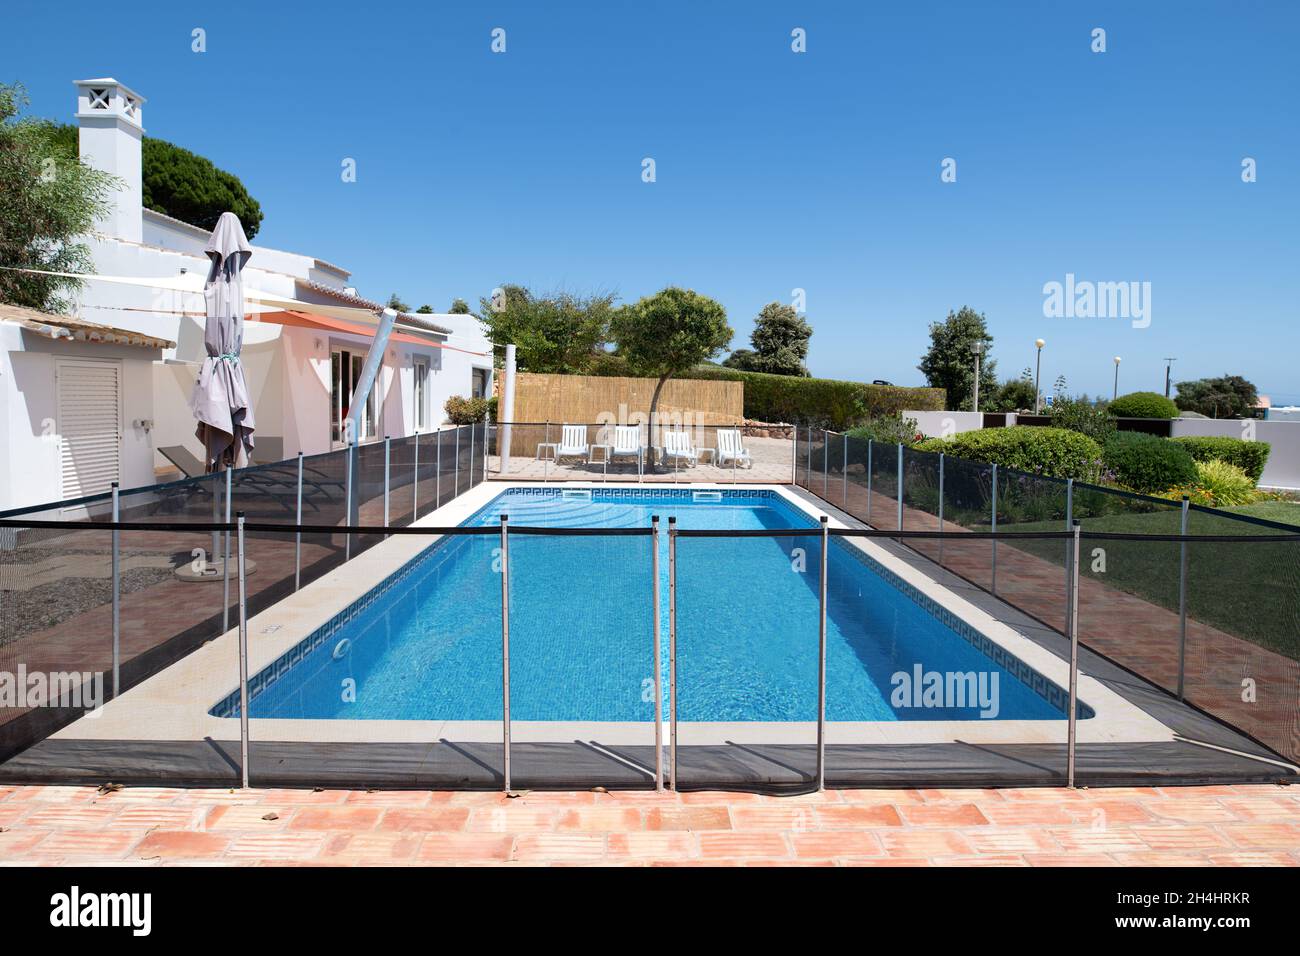 Fenced swimming pool in the garden of a luxury holiday villa Stock Photo